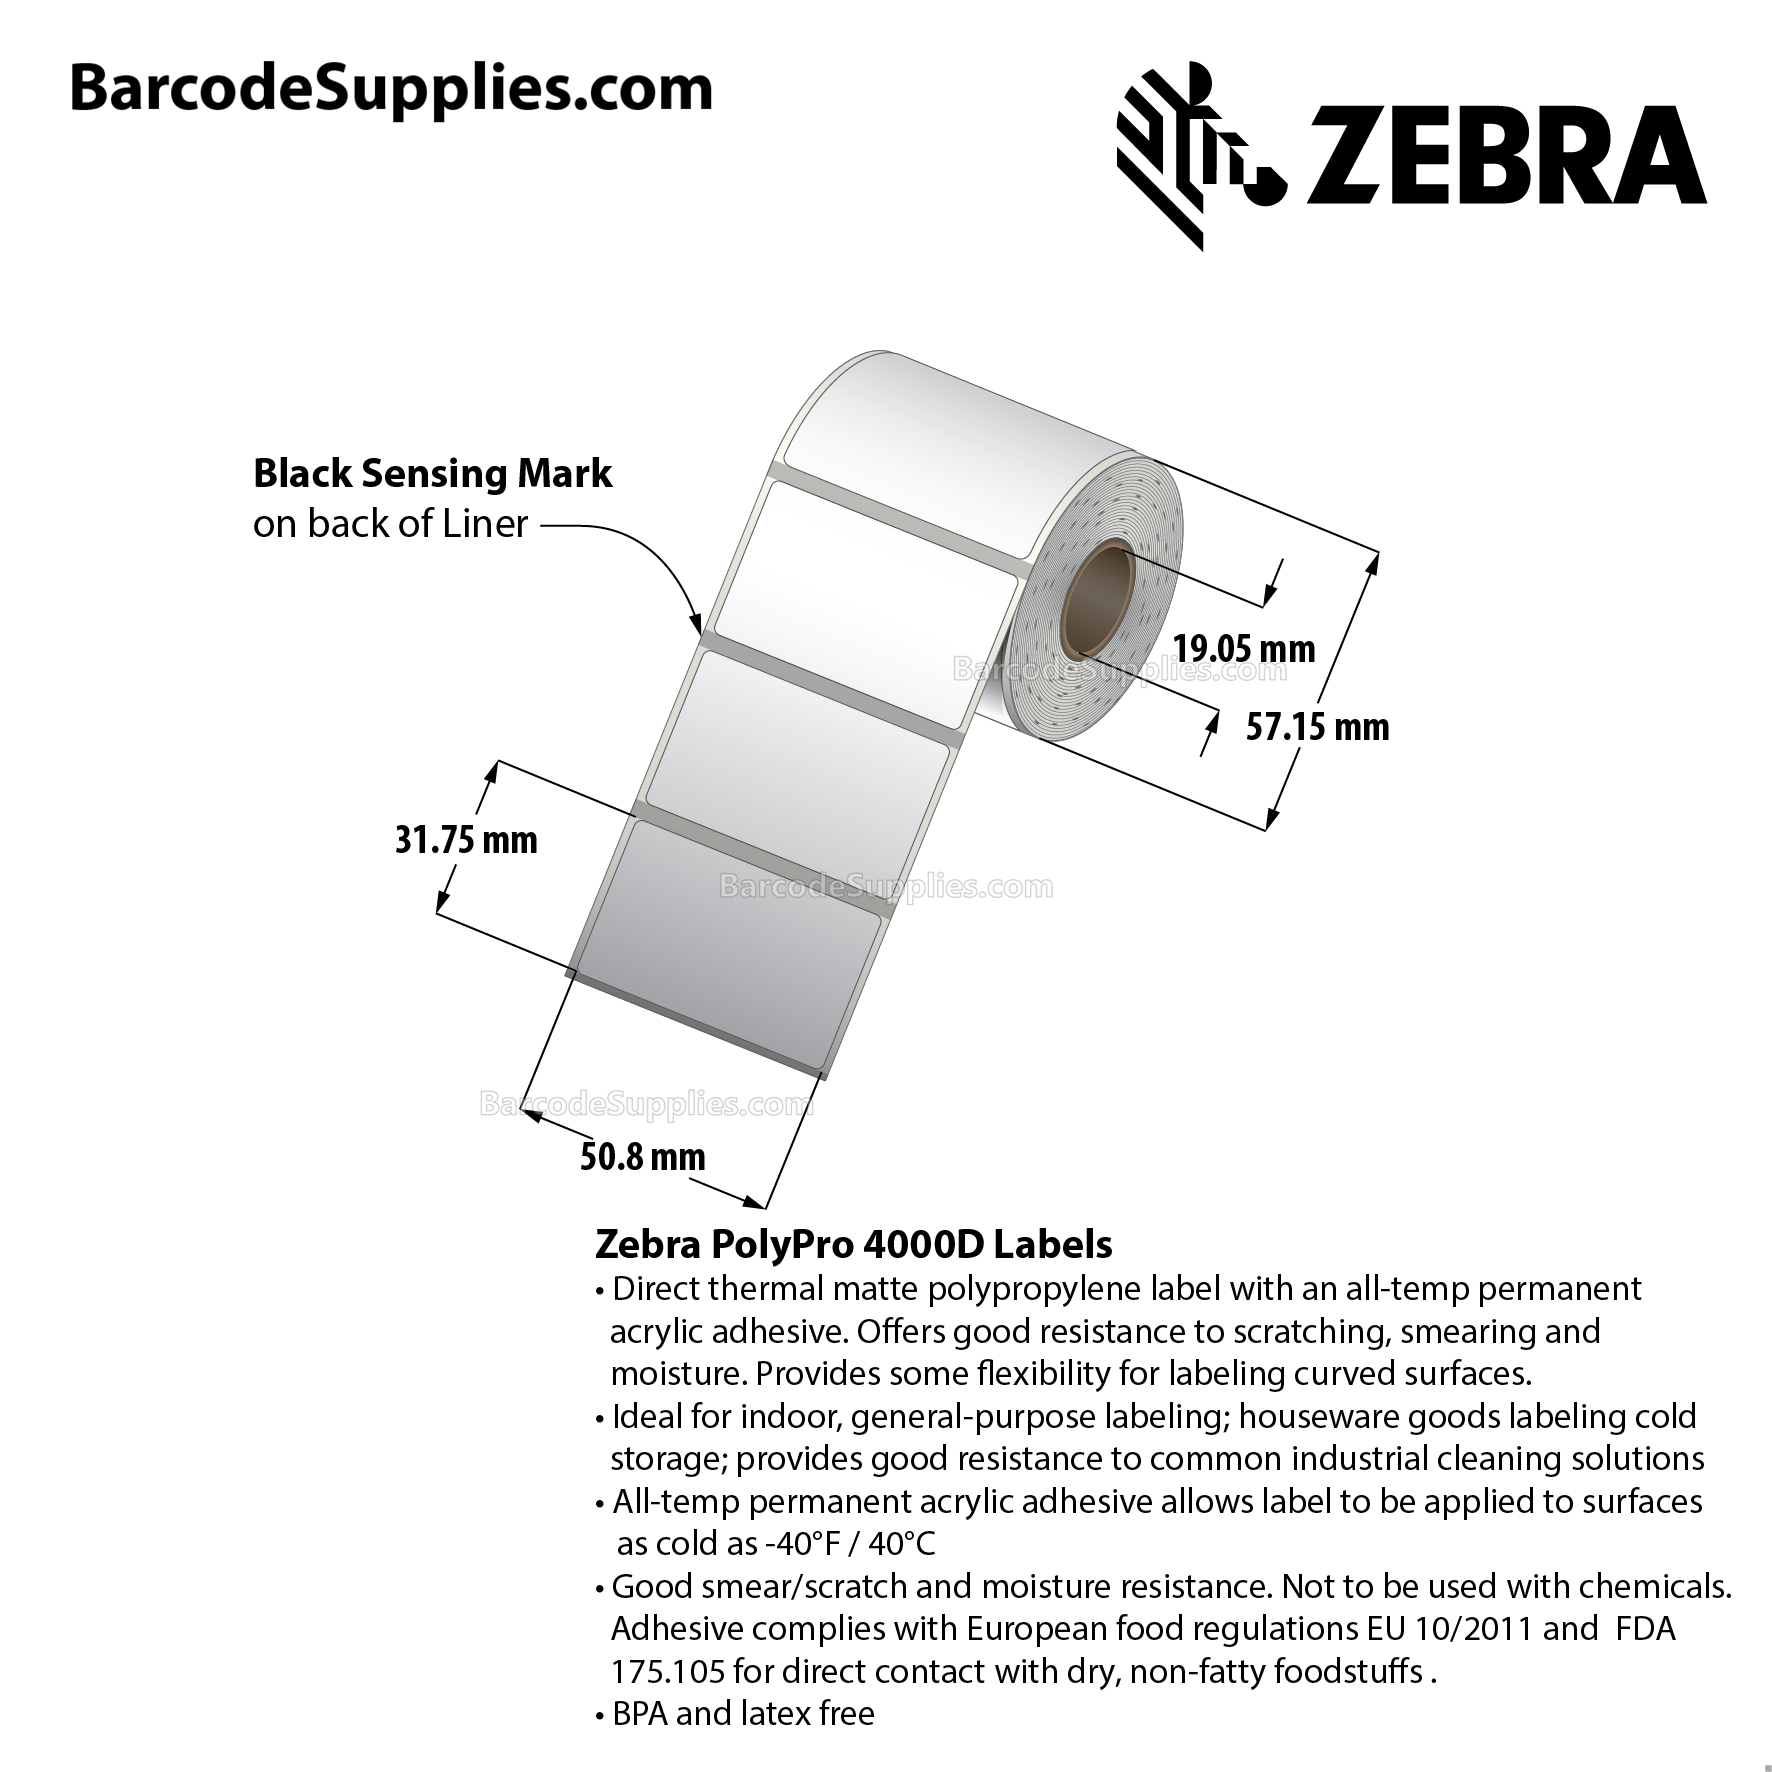 2 x 1.25 Direct Thermal White PolyPro 4000D Labels With All-Temp Adhesive - Black mark sensing - Not Perforated - 280 Labels Per Roll - Carton Of 36 Rolls - 10080 Labels Total - MPN: LD-R2BF5W